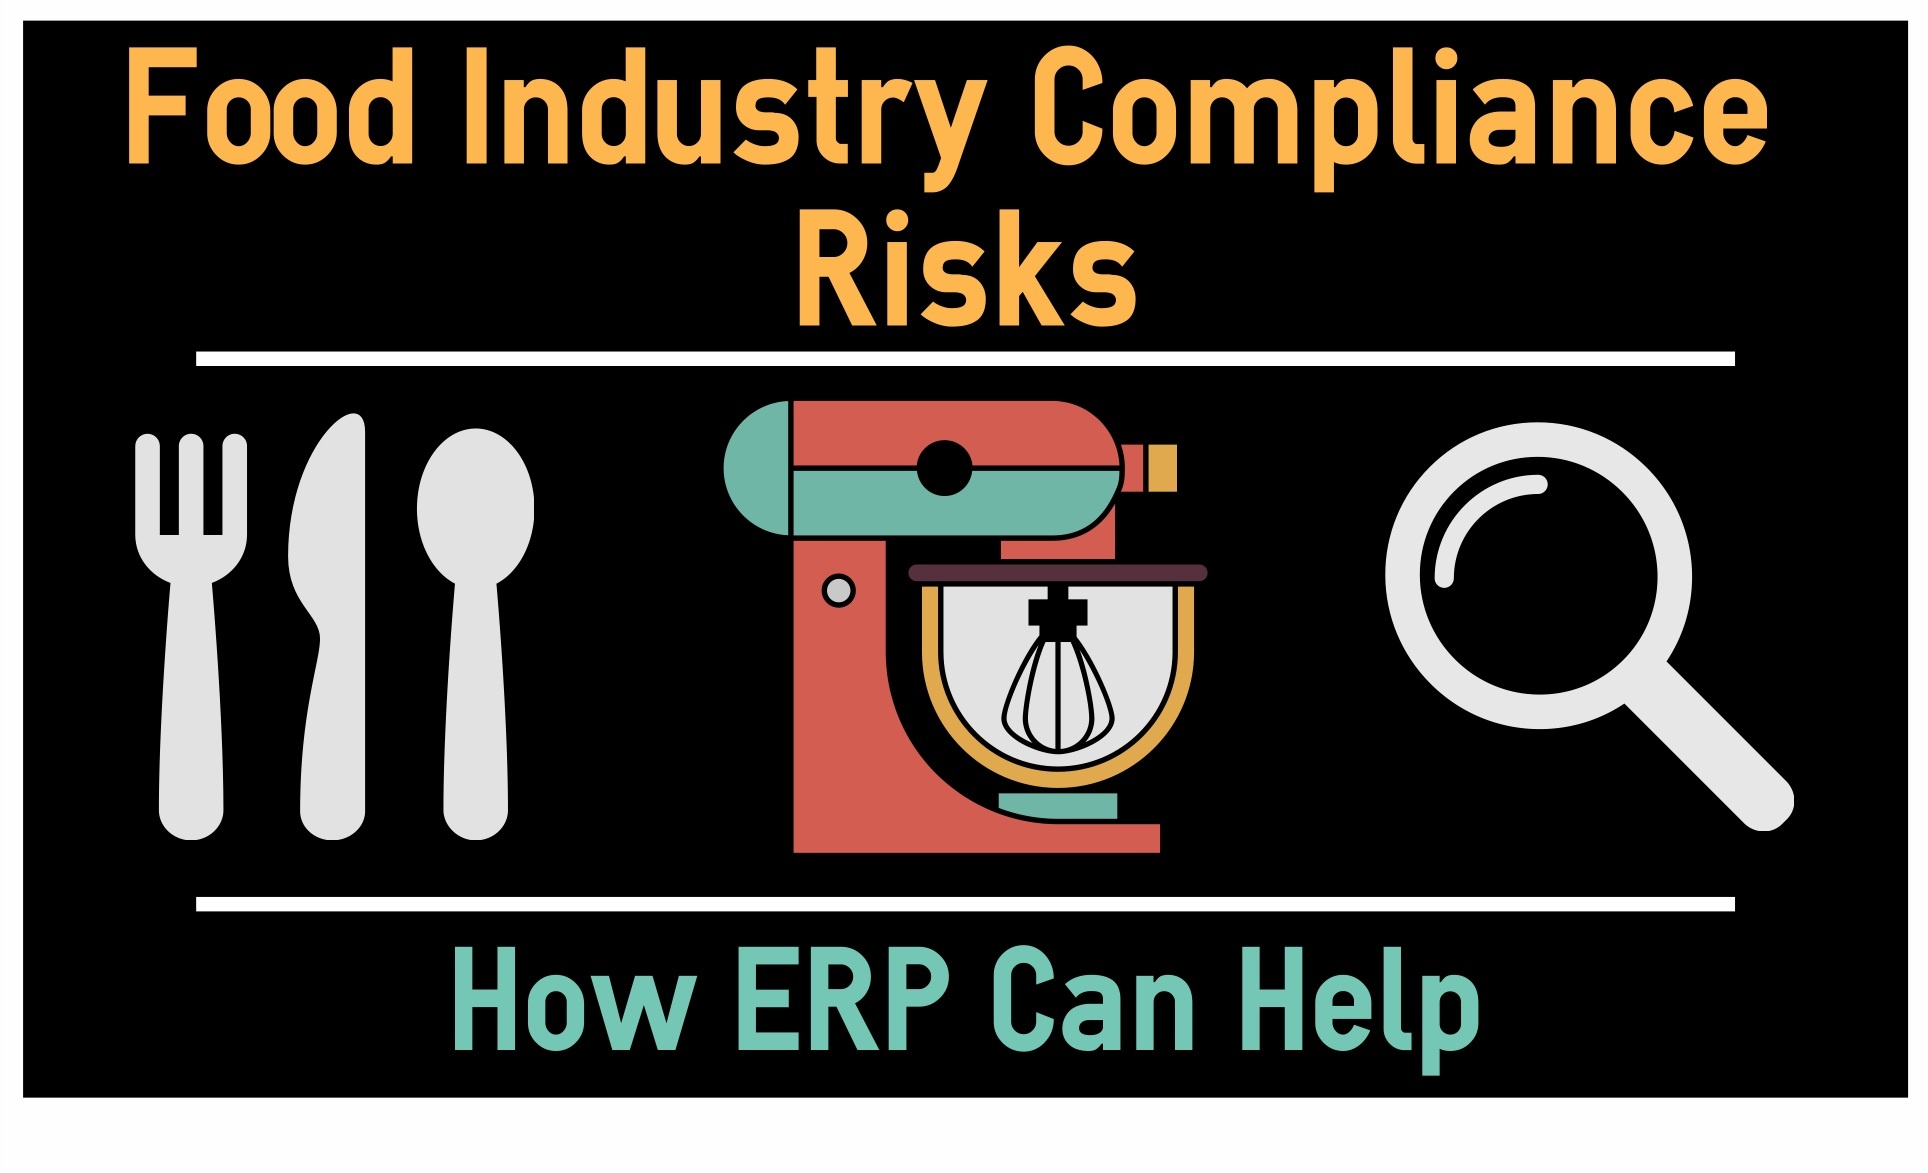 Food Industry Compliance Risks